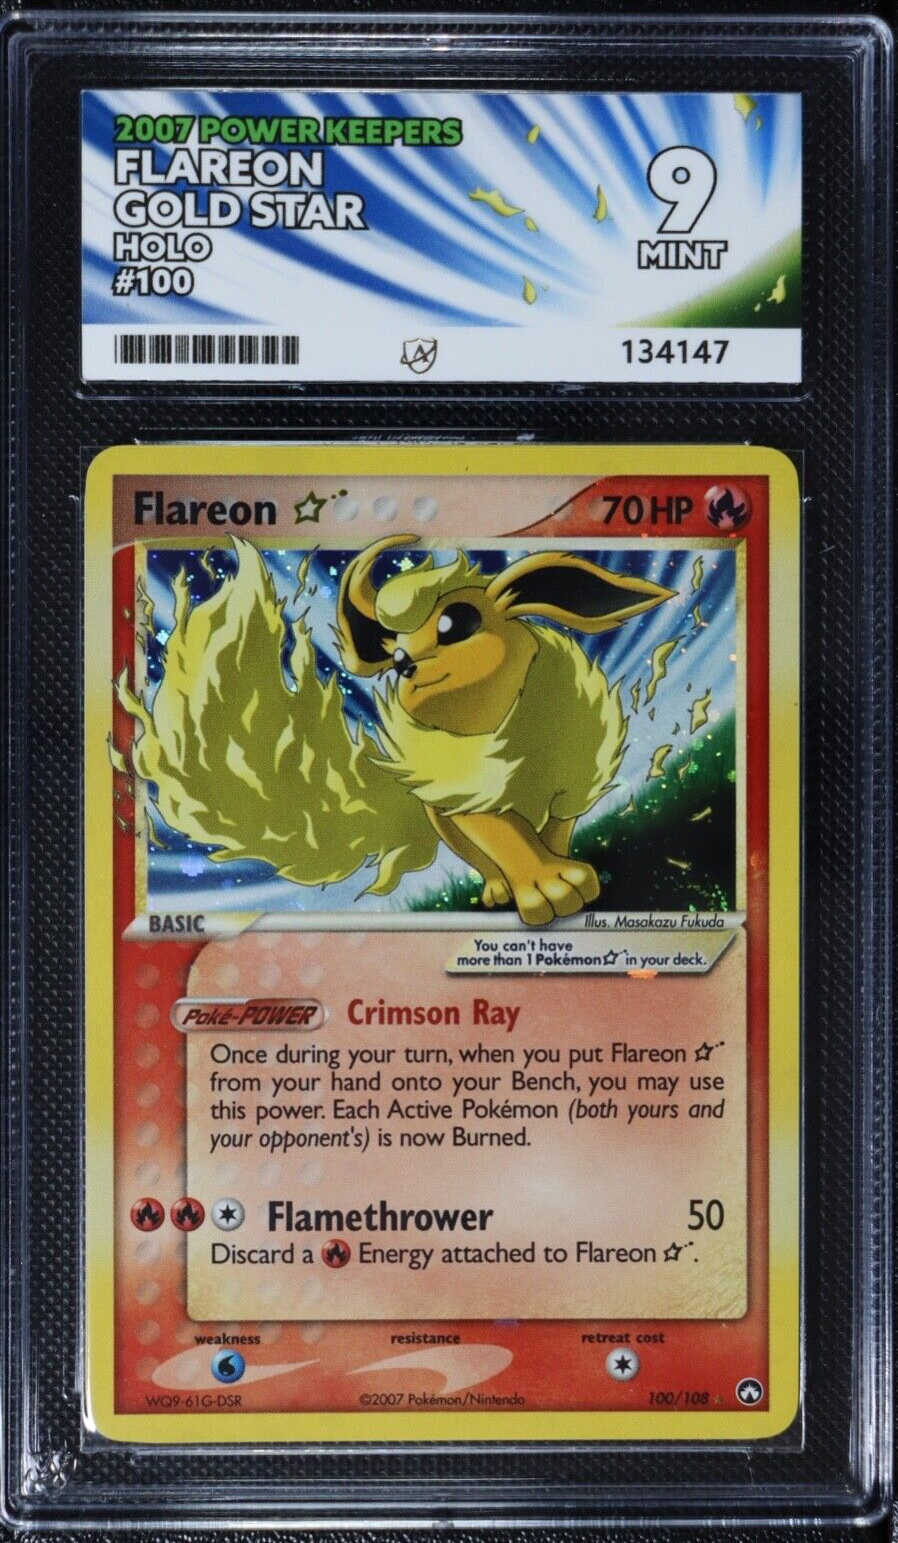 Pokemon Flareon 100108 Gold Star ex Power Keepers ACE 9 MINT